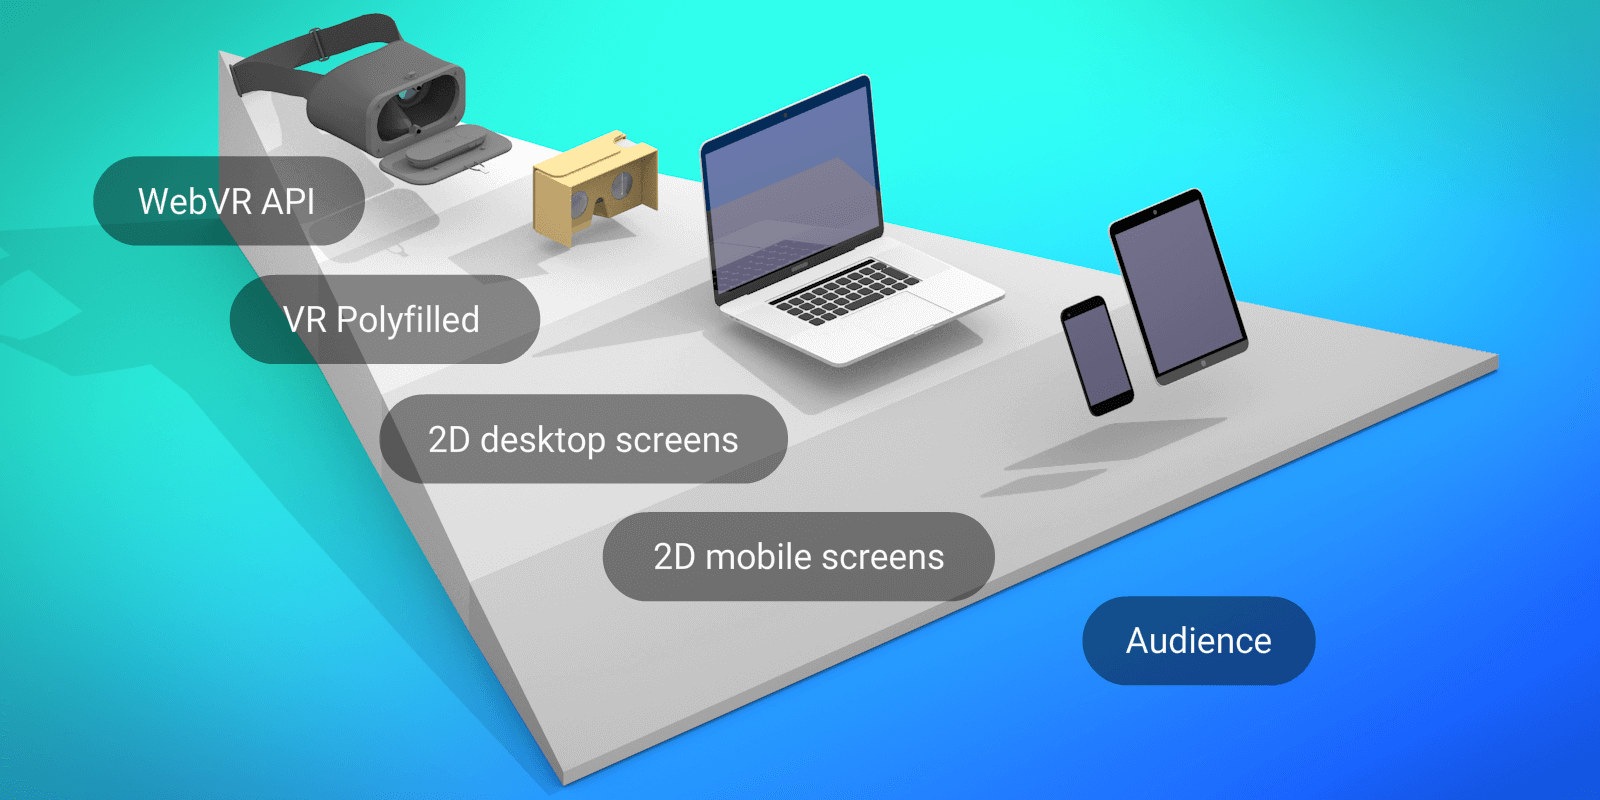 WebXR enables to consume XR experiences across a wide range of devices